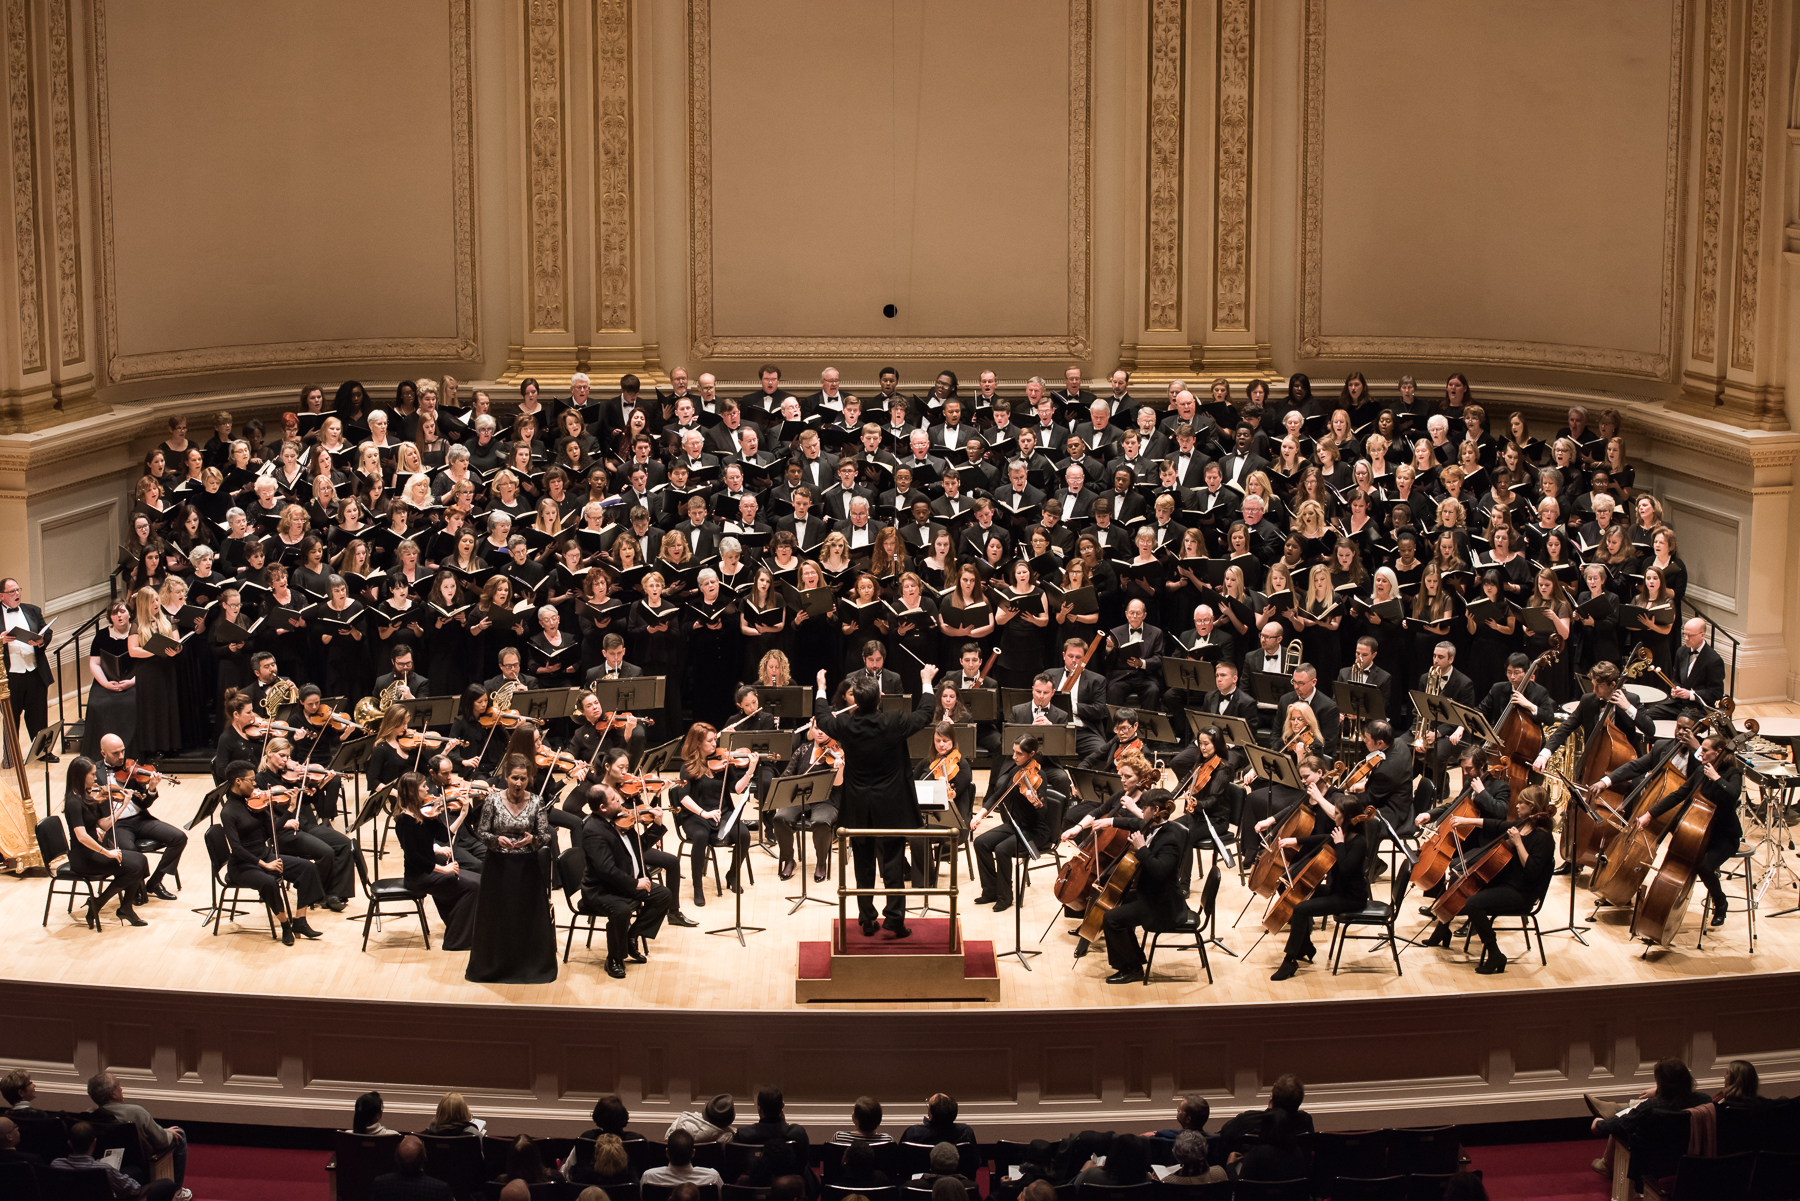 Distinguished Concerts International New York (DCINY) presents Requiem for the Living: The Music of Dan Forrest in Review